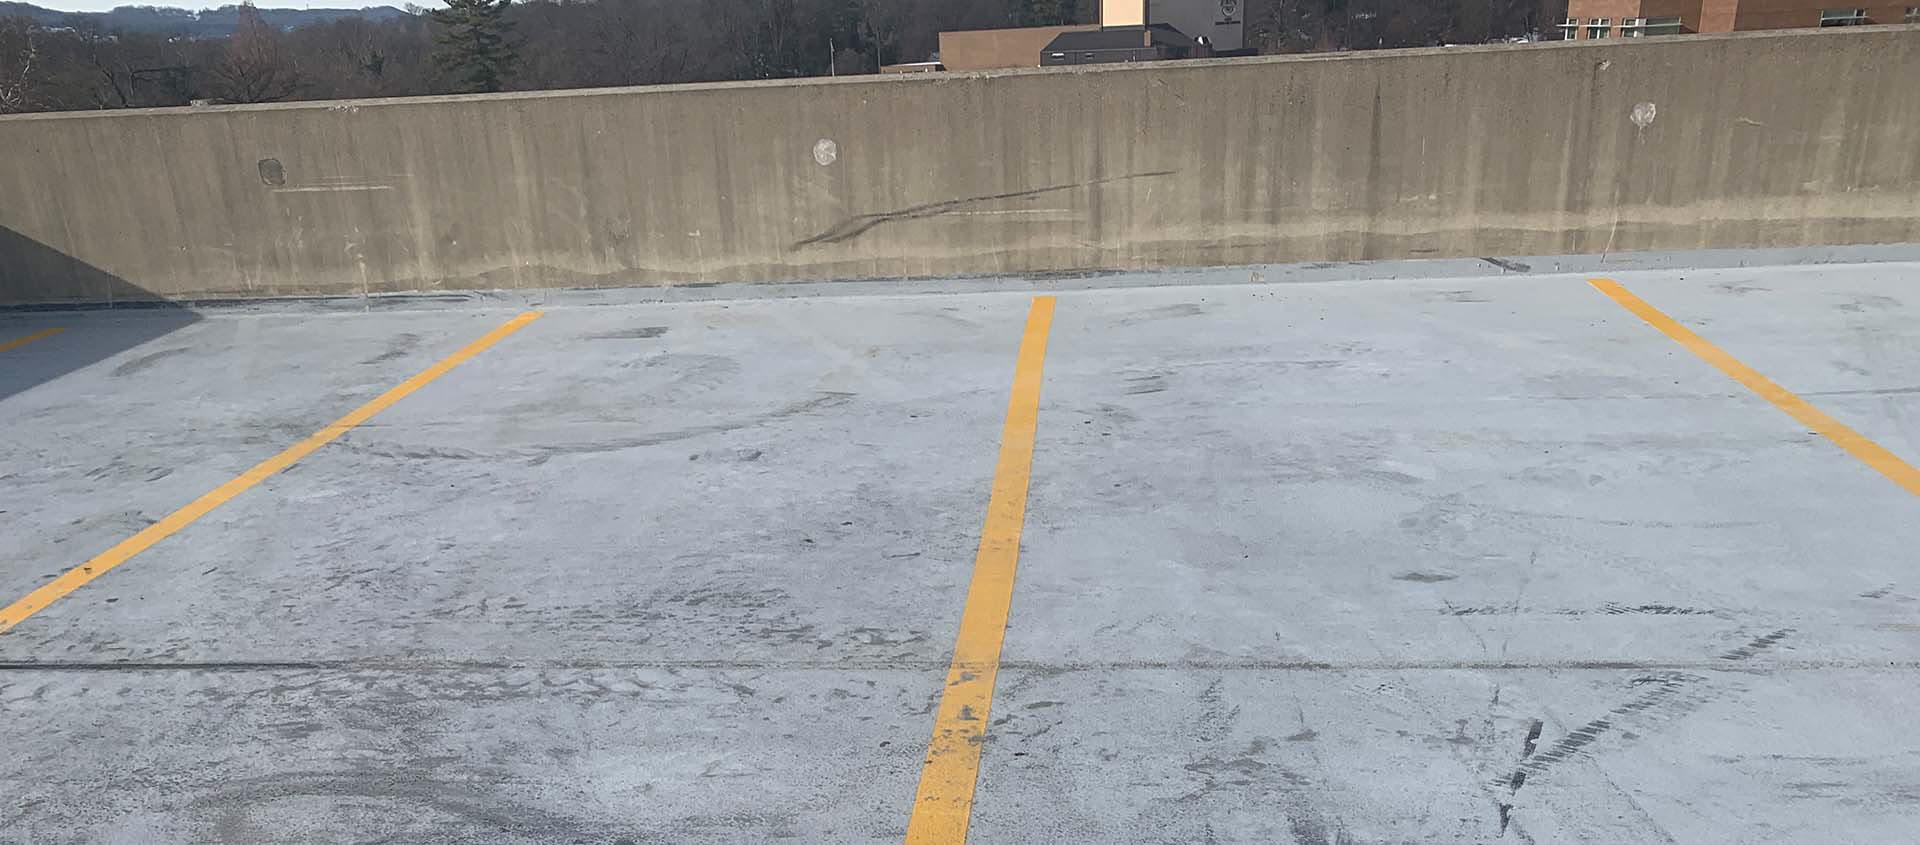 Rooftop level of parking garage exposed to sunlight